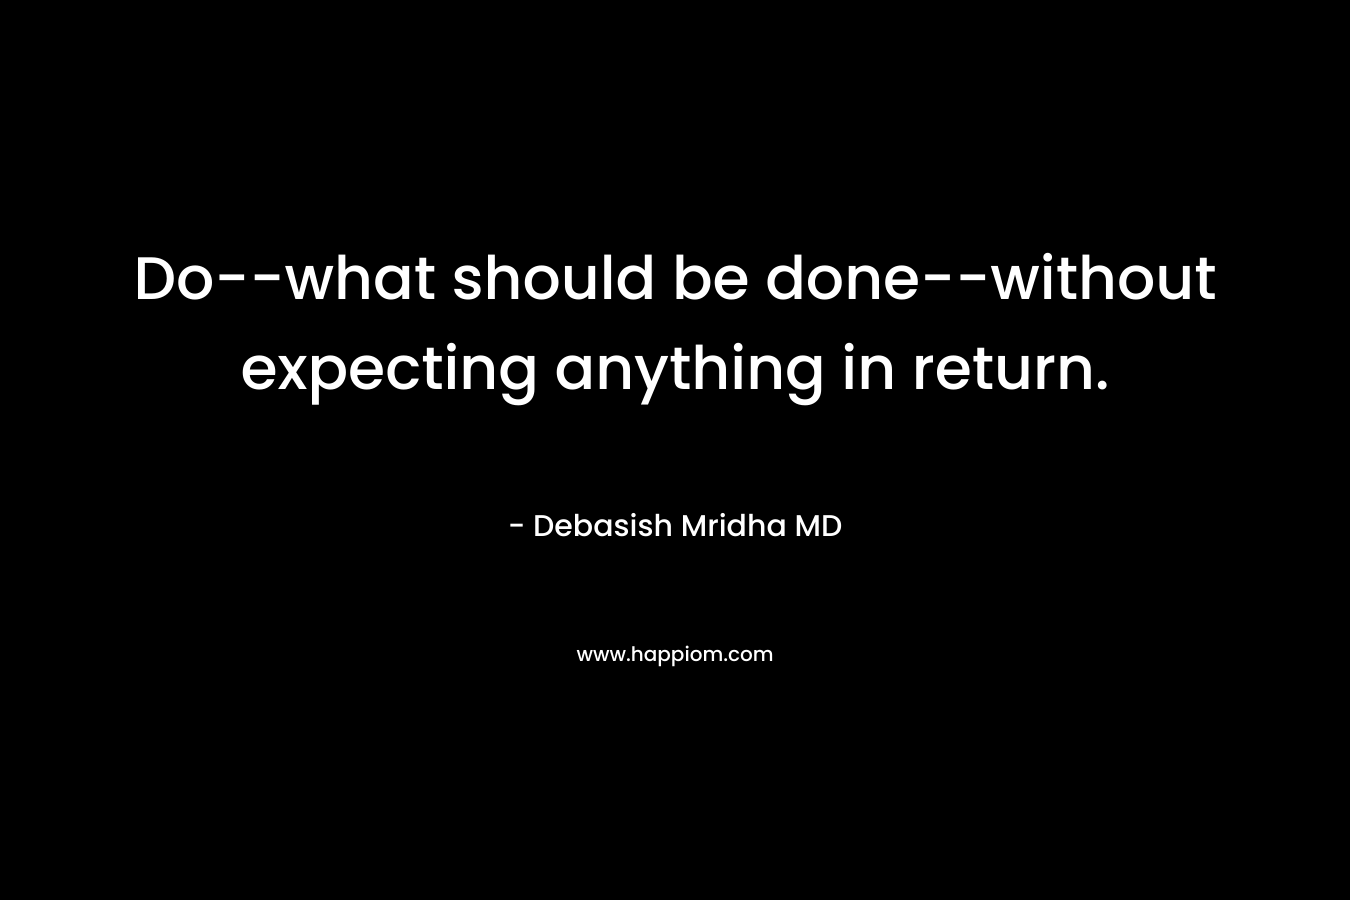 Do--what should be done--without expecting anything in return.